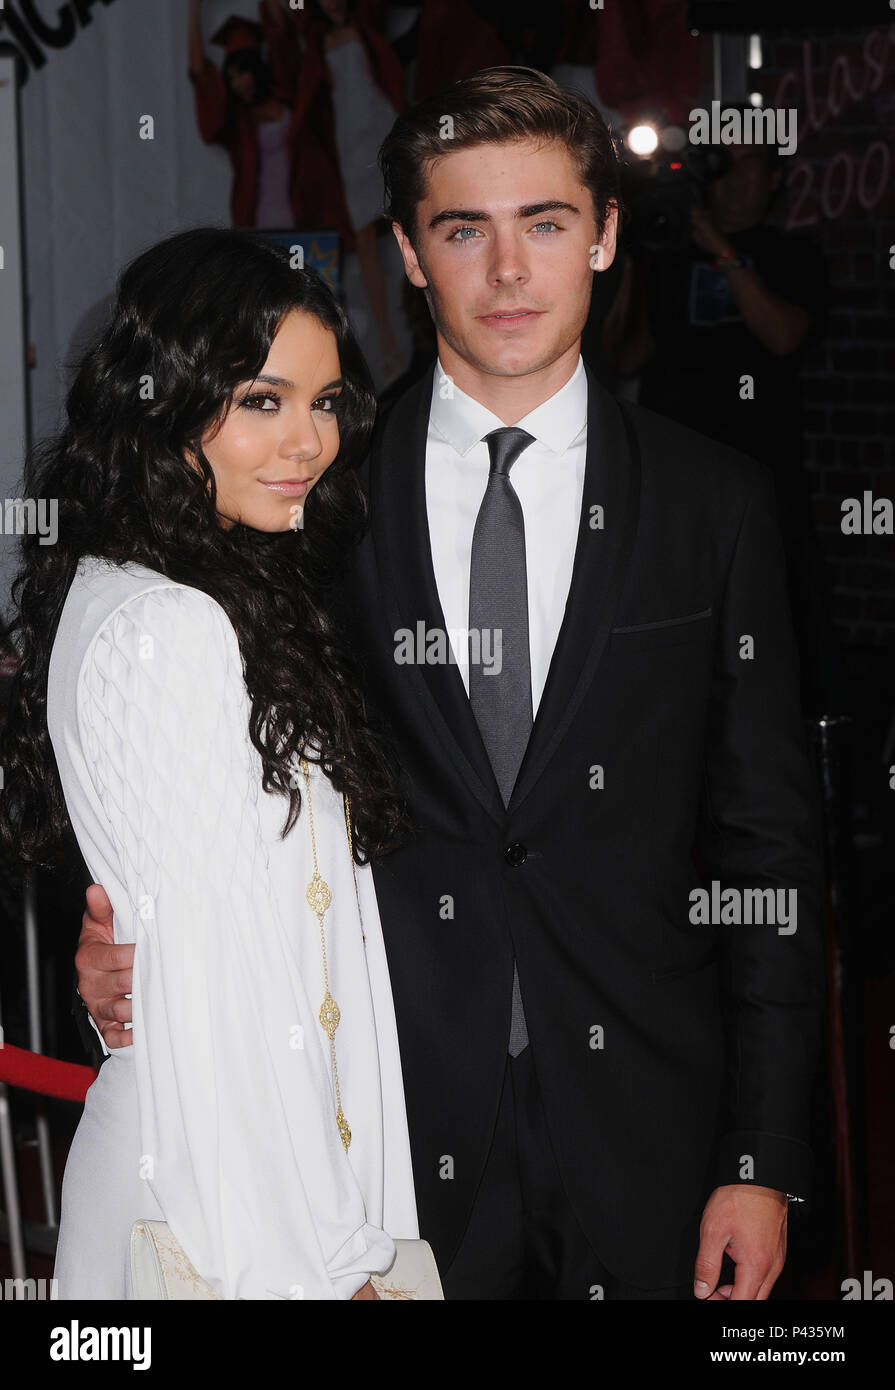 Vanessa Hudgens and Zac Efron  - High School Musical 3 Premiere at the Galen Center in Los Angeles.          -            02 HudgensVanessa EfronZac 02.jpg02 HudgensVanessa EfronZac 02  Event in Hollywood Life - California, Red Carpet Event, USA, Film Industry, Celebrities, Photography, Bestof, Arts Culture and Entertainment, Topix Celebrities fashion, Best of, Hollywood Life, Event in Hollywood Life - California, Red Carpet and backstage, movie celebrities, TV celebrities, Music celebrities, Topix, actors from the same movie, cast and co star together.  inquiry tsuni@Gamma-USA.com, Credit Tsu Stock Photo